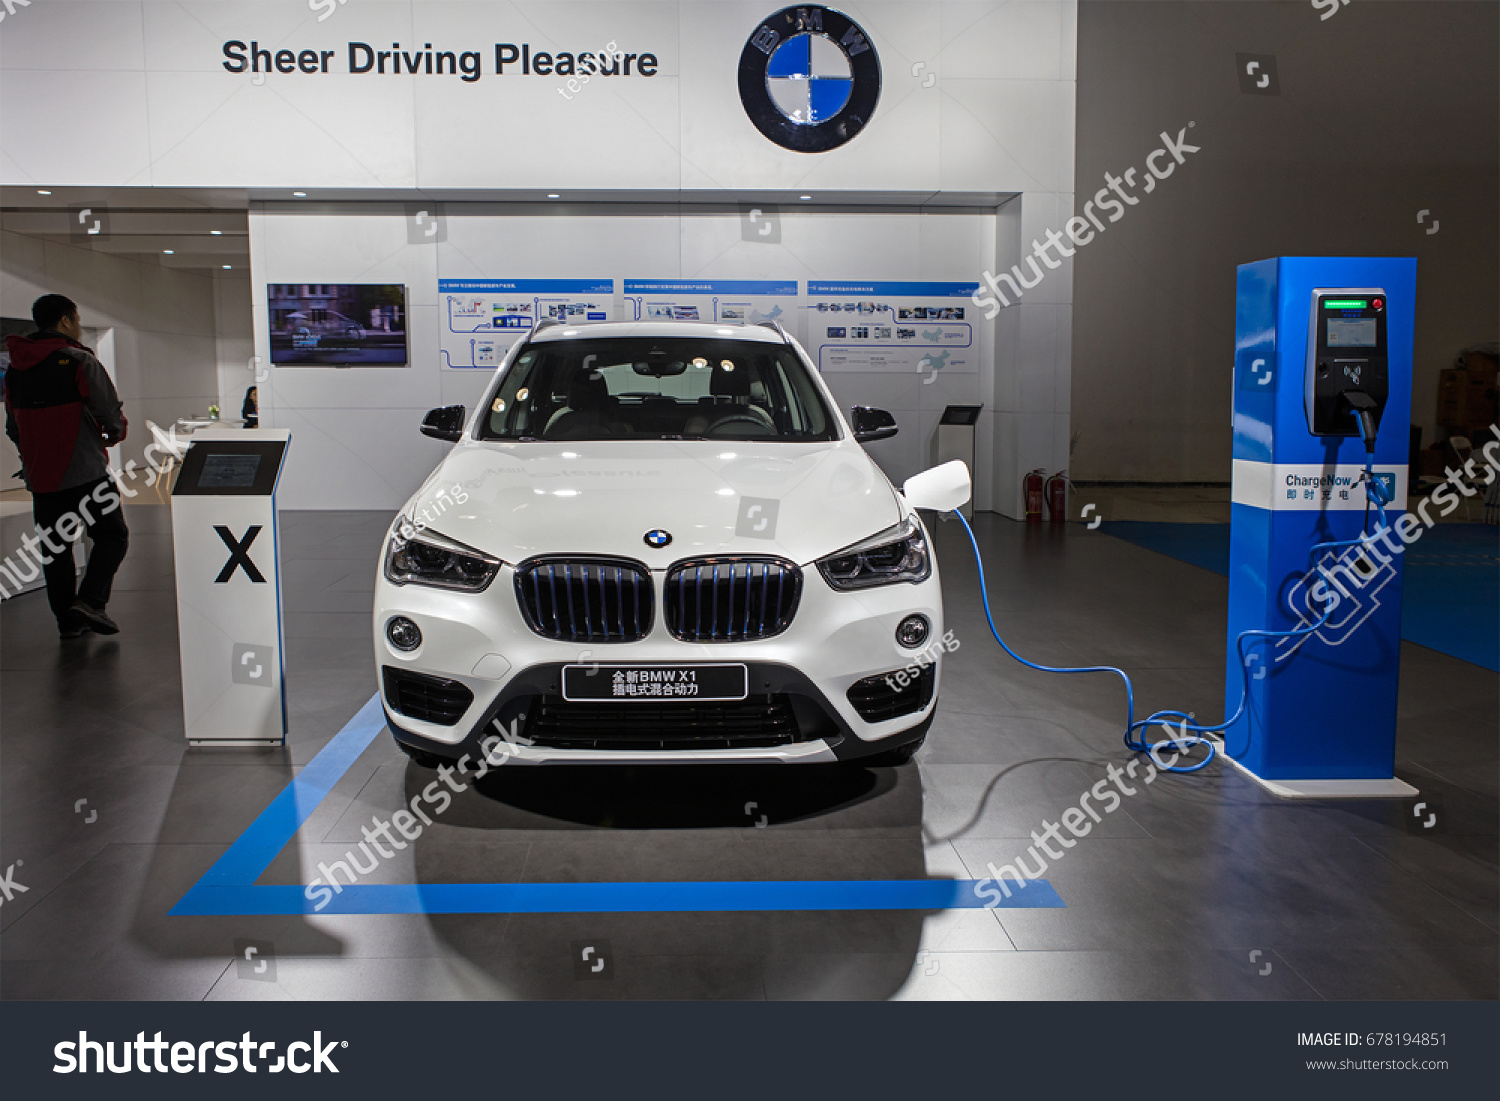 BEIJING, CHINA - OCTOBER 15, 2016: BMW X1 electric vehicle is connected to a electric charging station at the China International New Energy Automobile Exhibition at China National Convention Center #678194851